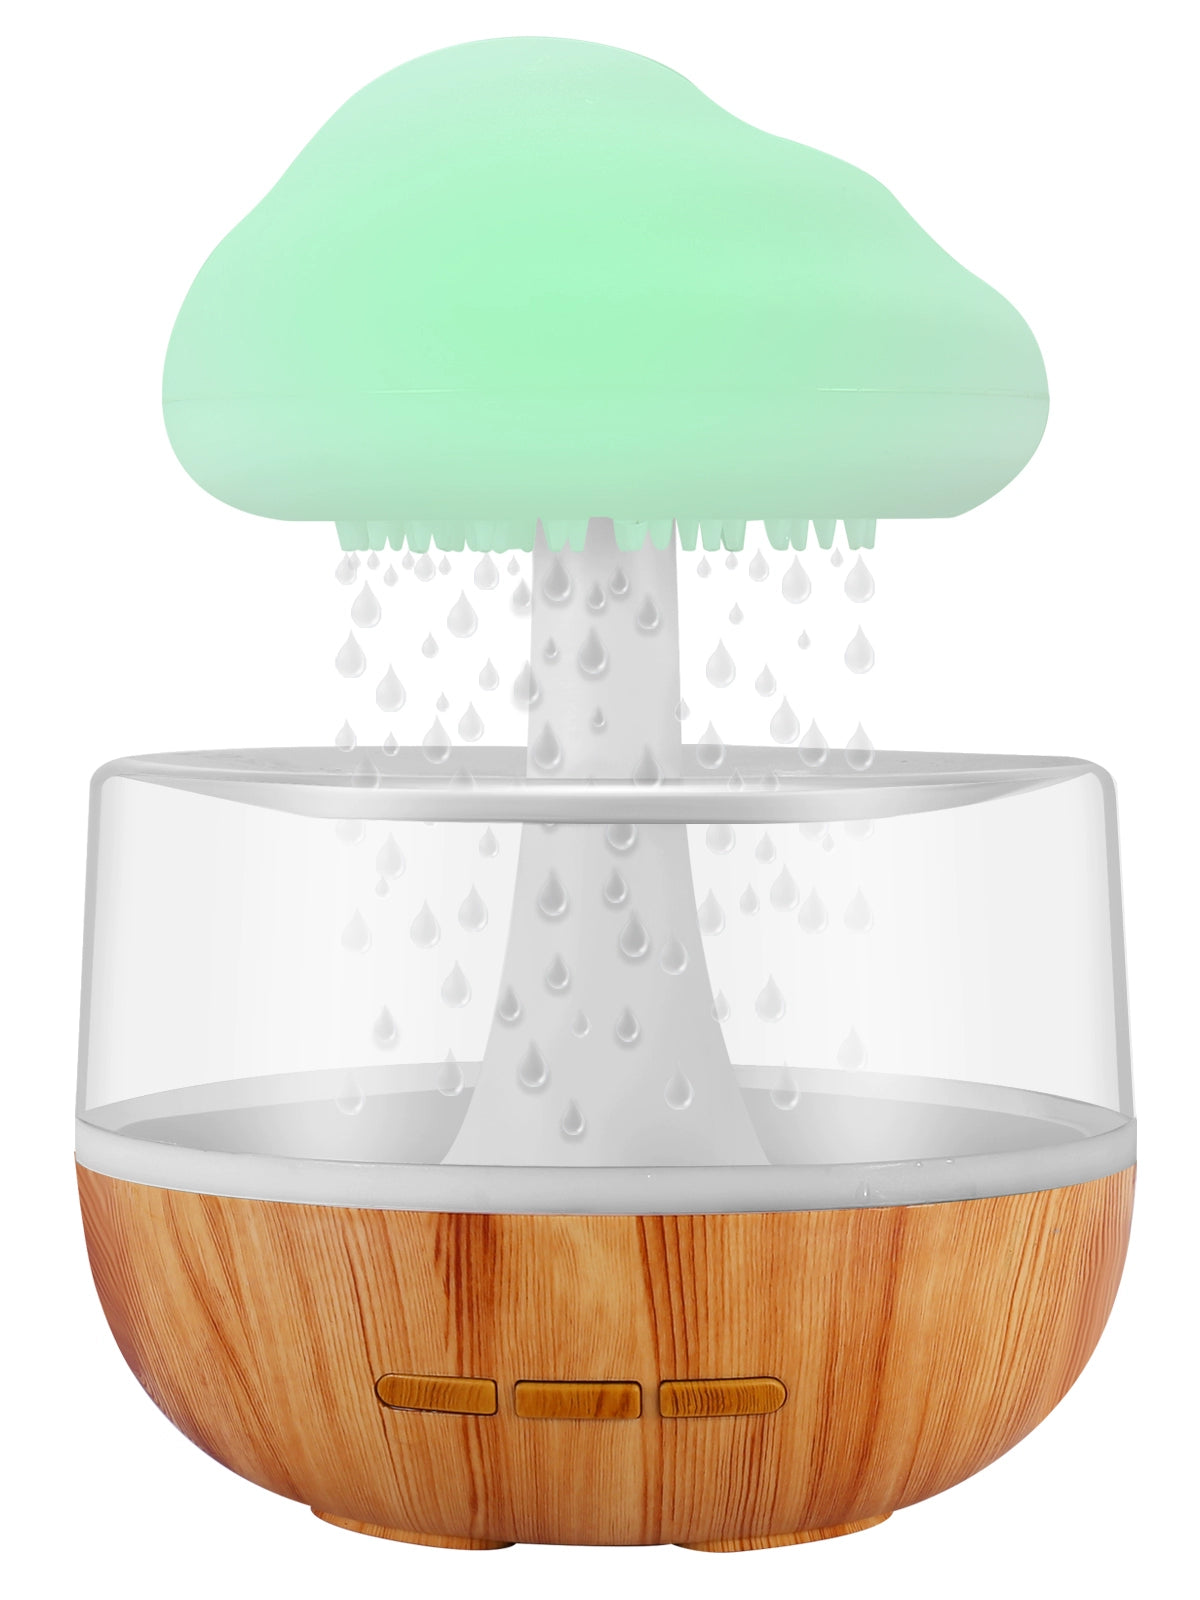 Yuyun Humidifier Rain Clouds Lamp Mushroom Lamp Relaxing Decompression Aroma Fragrance Essential Oil Amazon Same Design